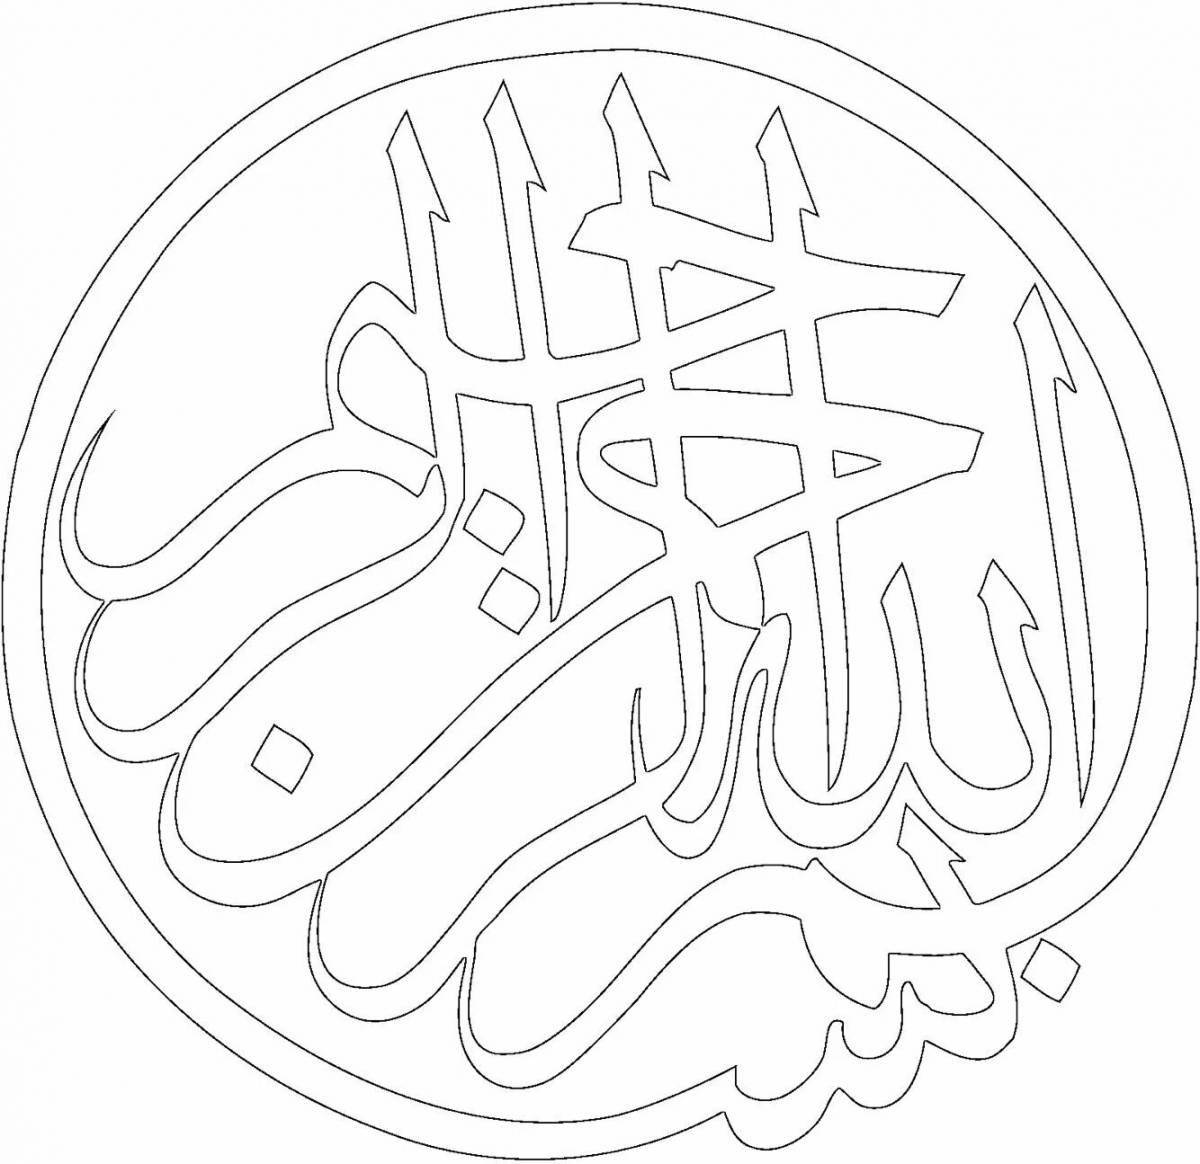 Intriguing Arabic coloring book